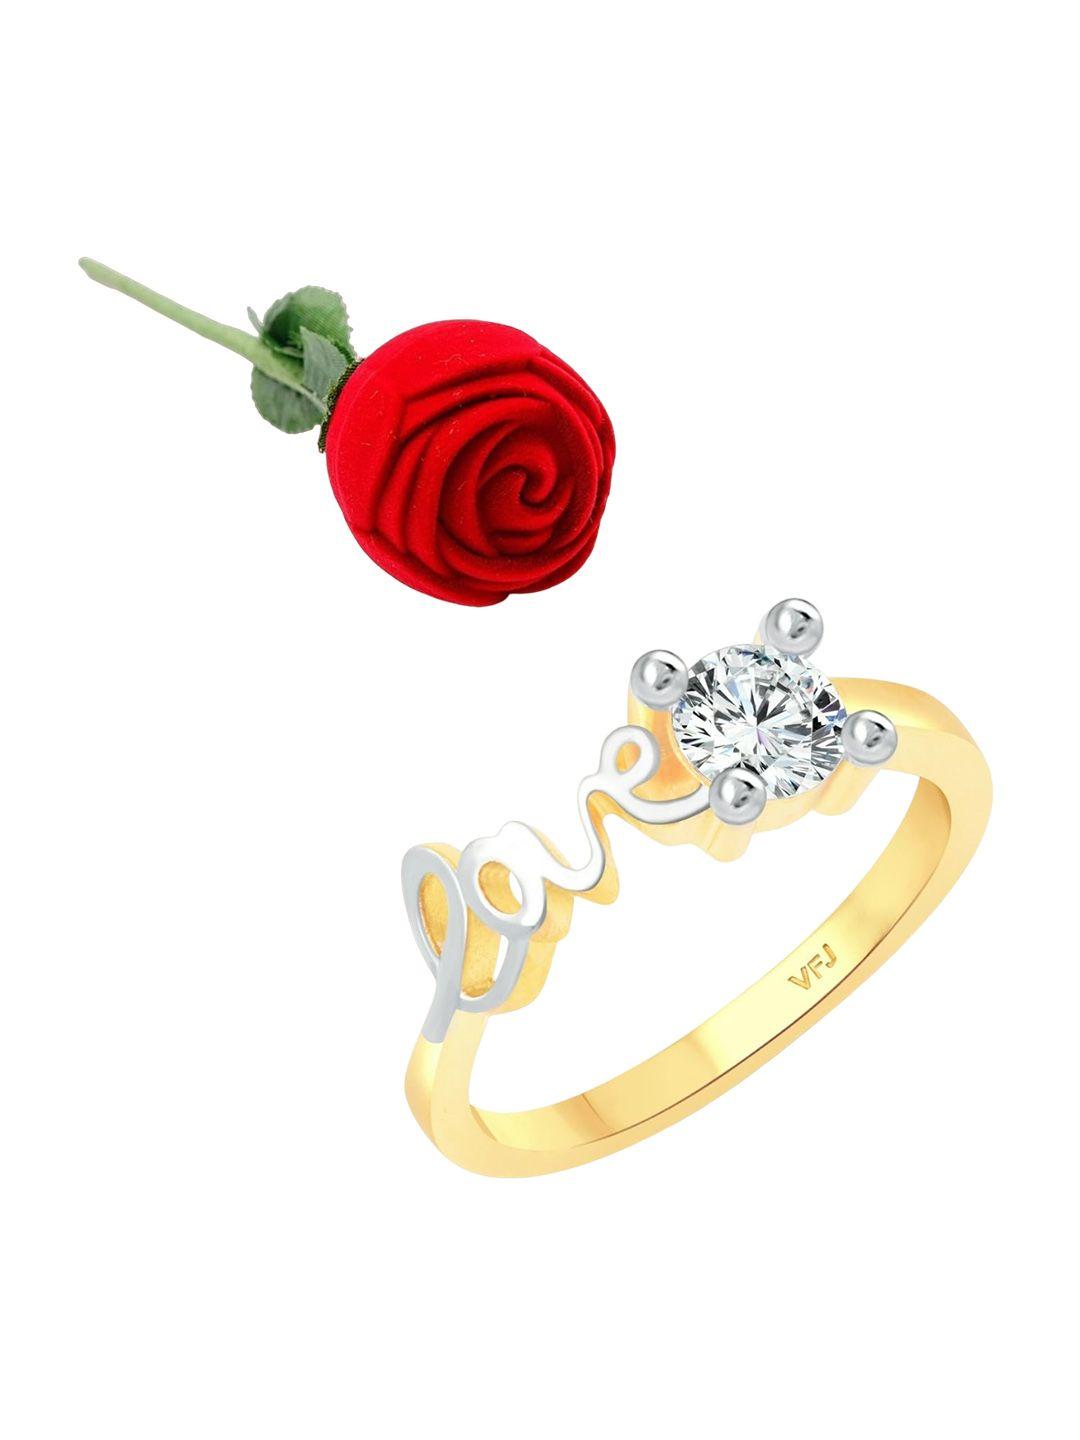 vighnaharta gold-plated cz-stone studded love design finger ring with rose box